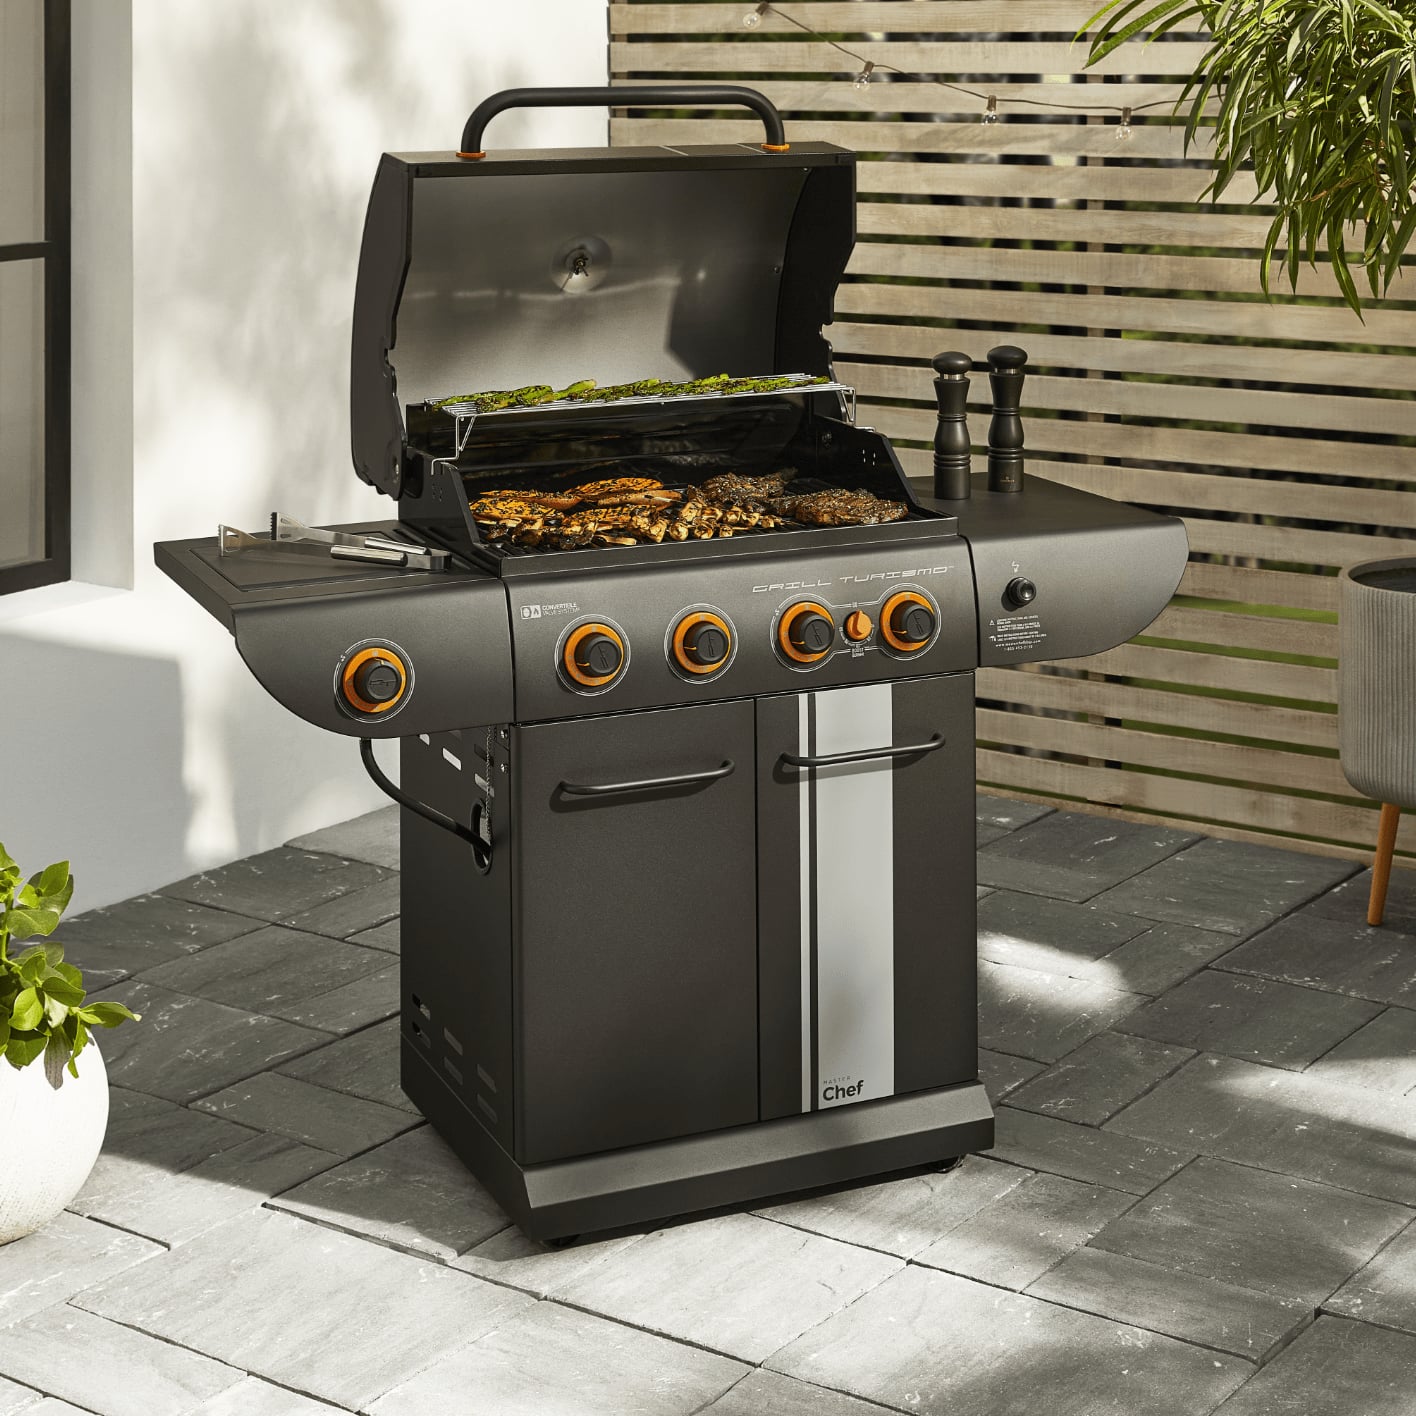 Food grilling on a MASTER Chef Turismo Convertible Propane BBQ on a patio.